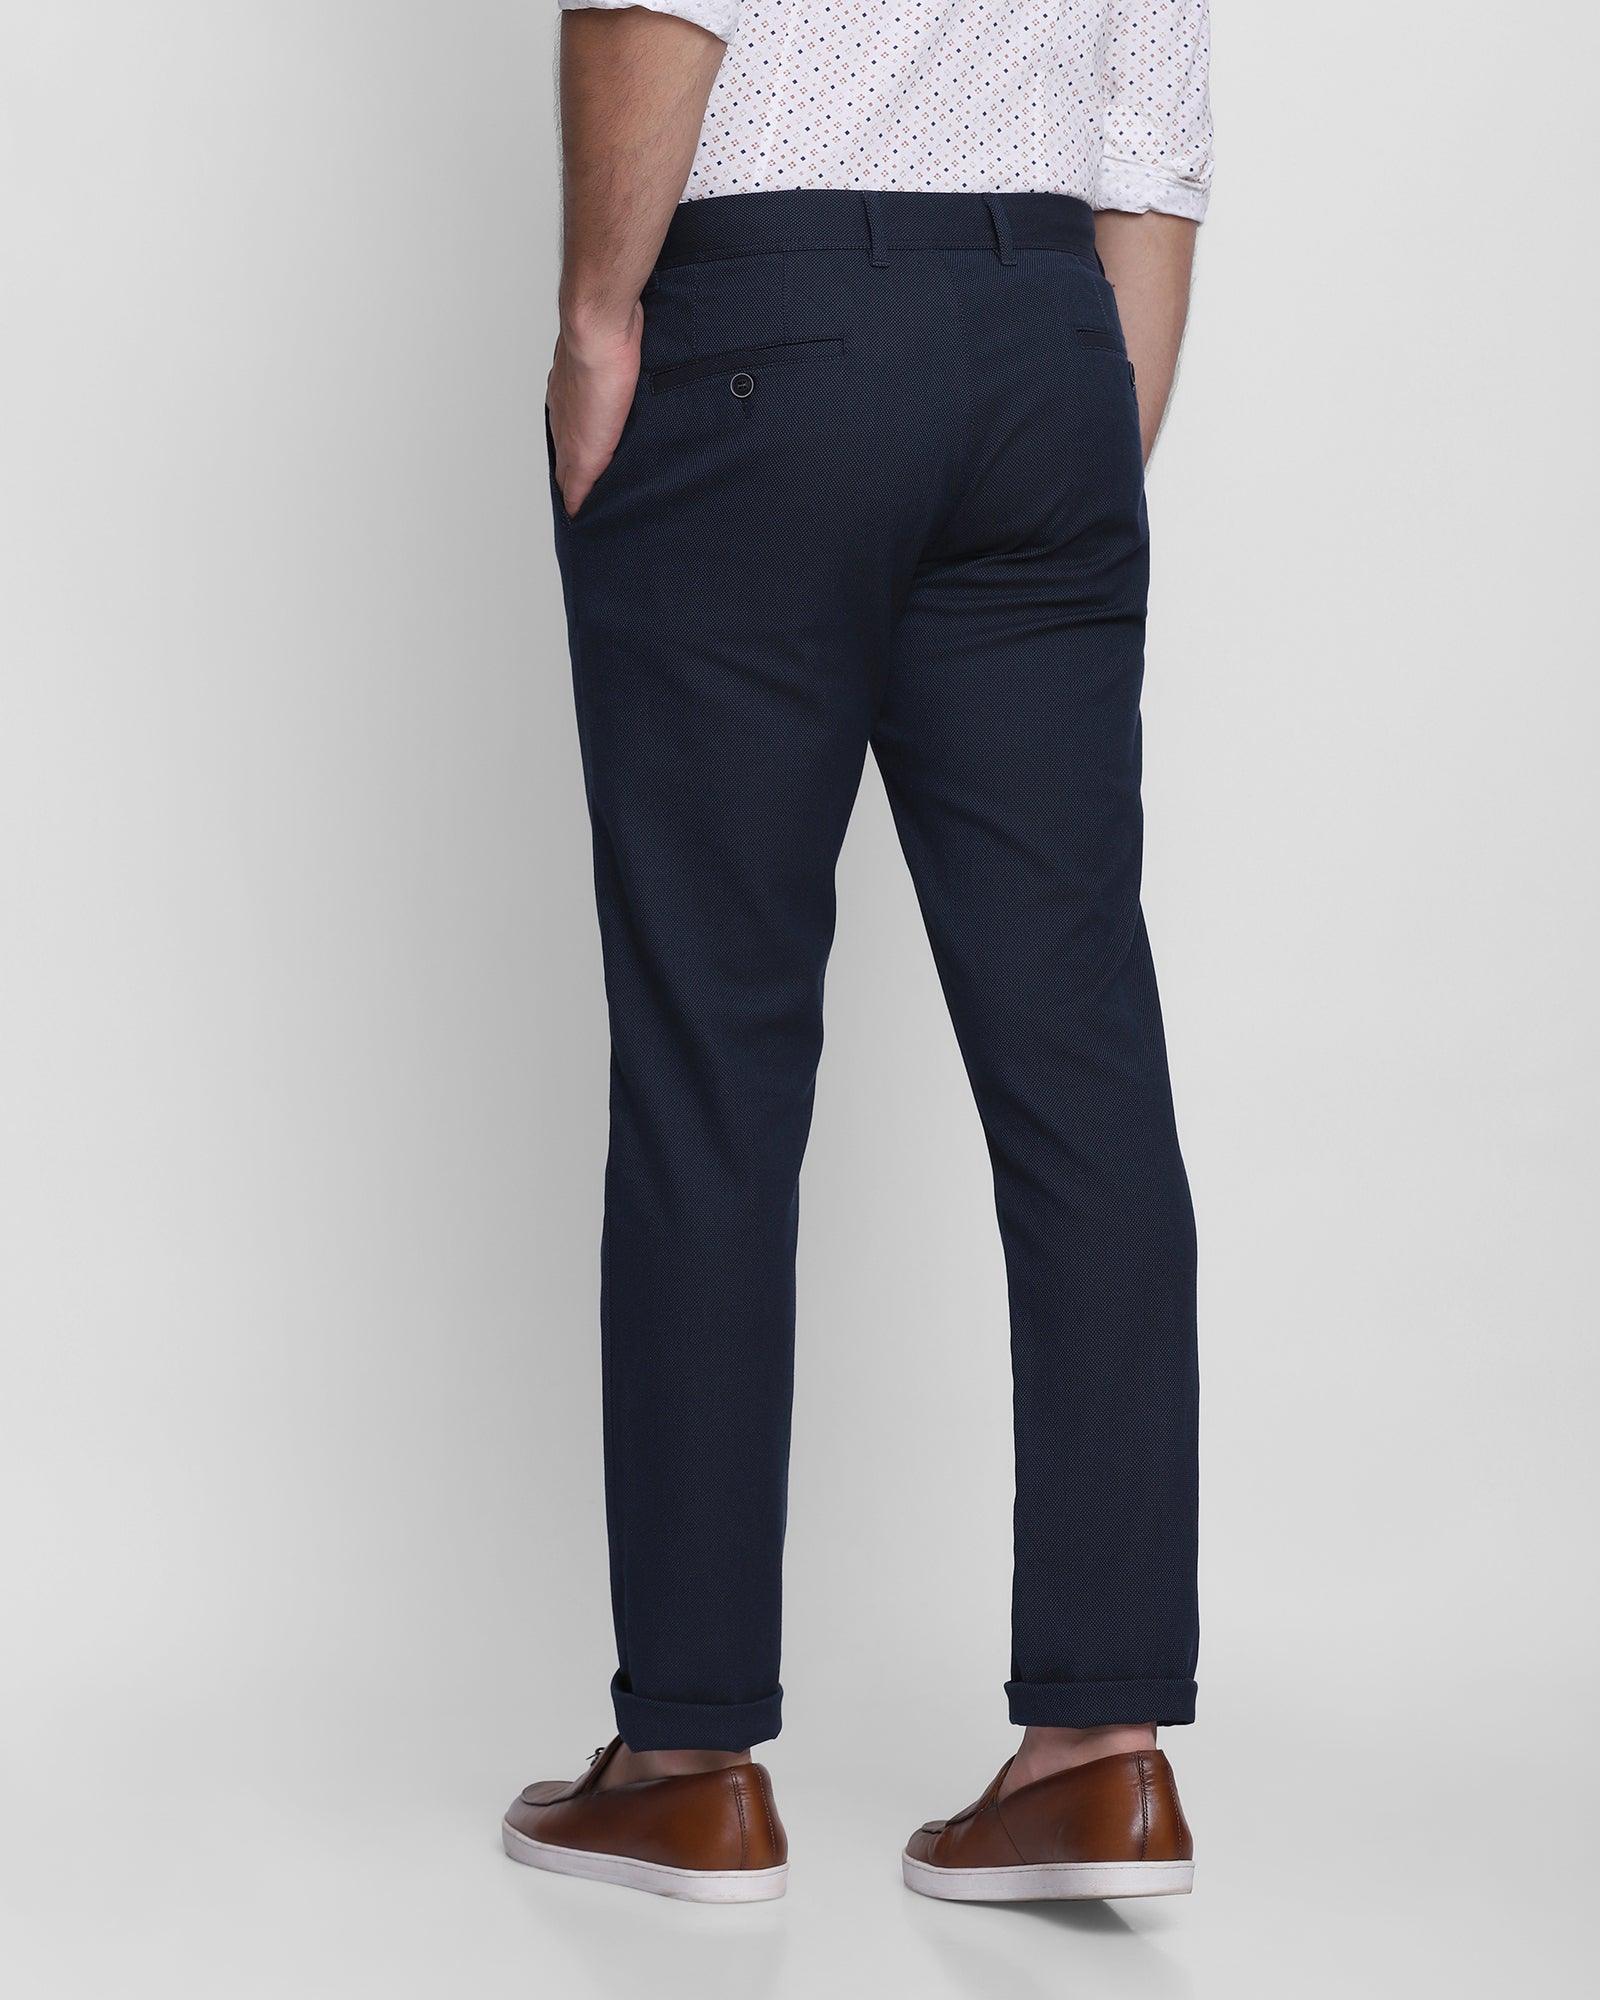 Slim Fit B-91 Casual Navy Textured Khakis - Laser